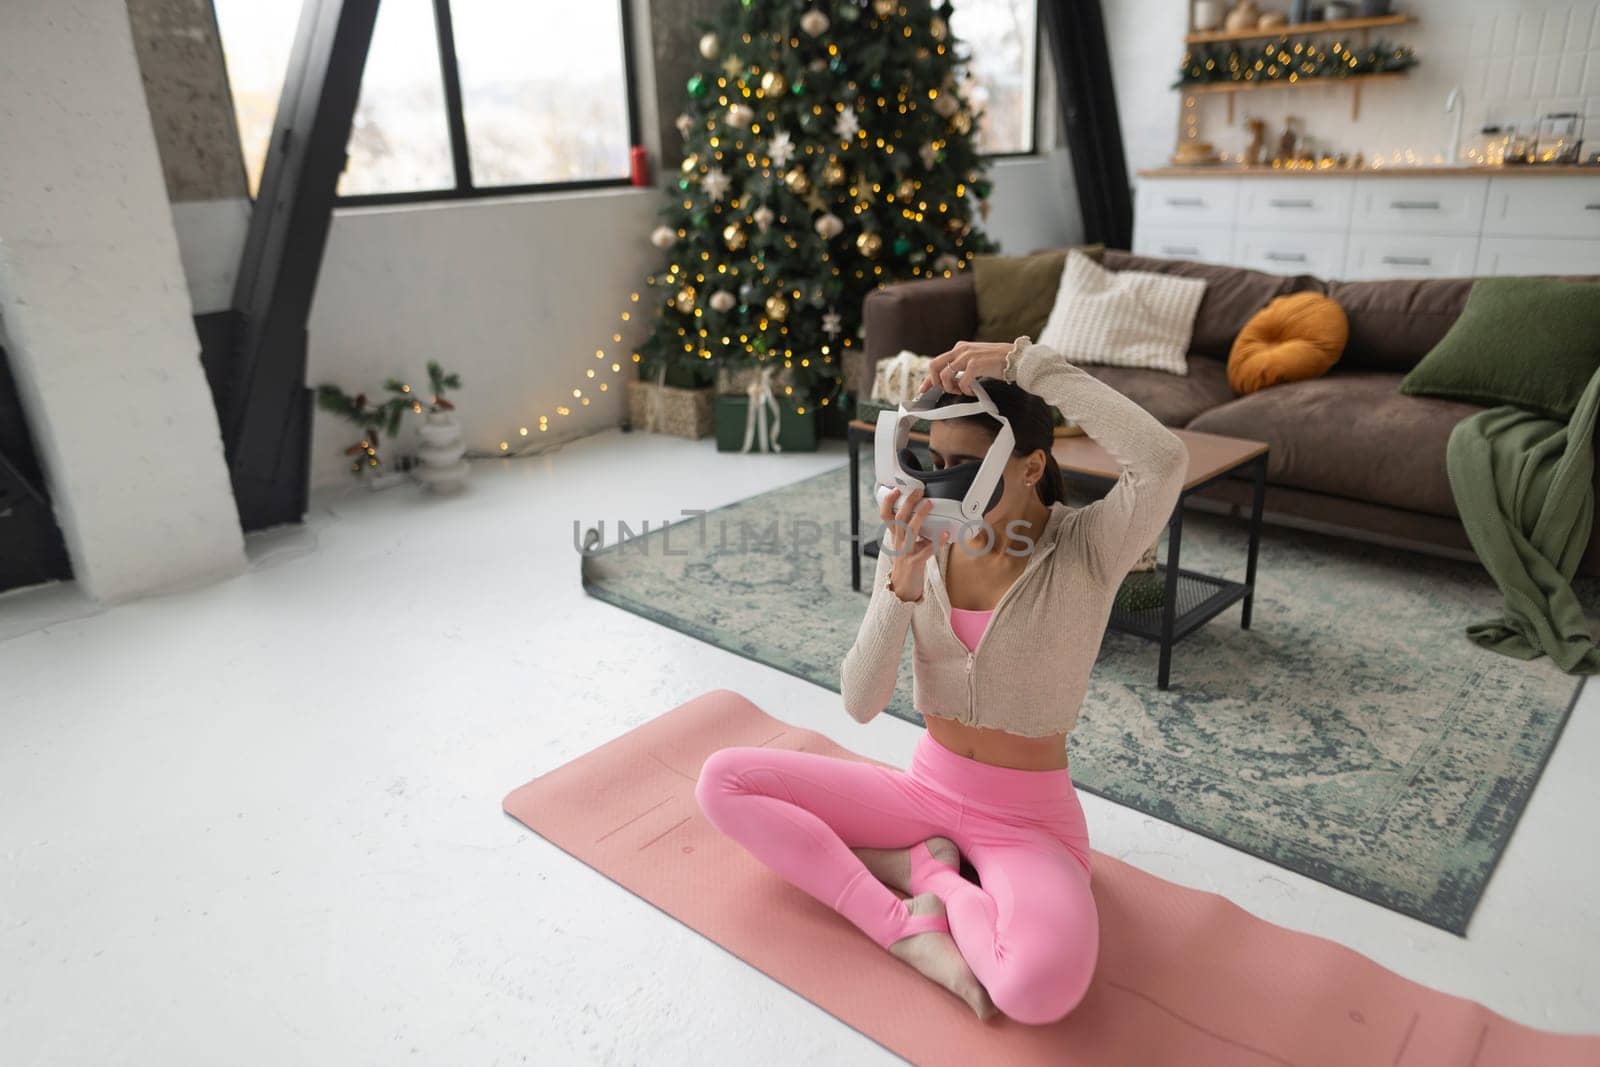 Donning pink athletic attire, the woman practices yoga in virtual reality. High quality photo